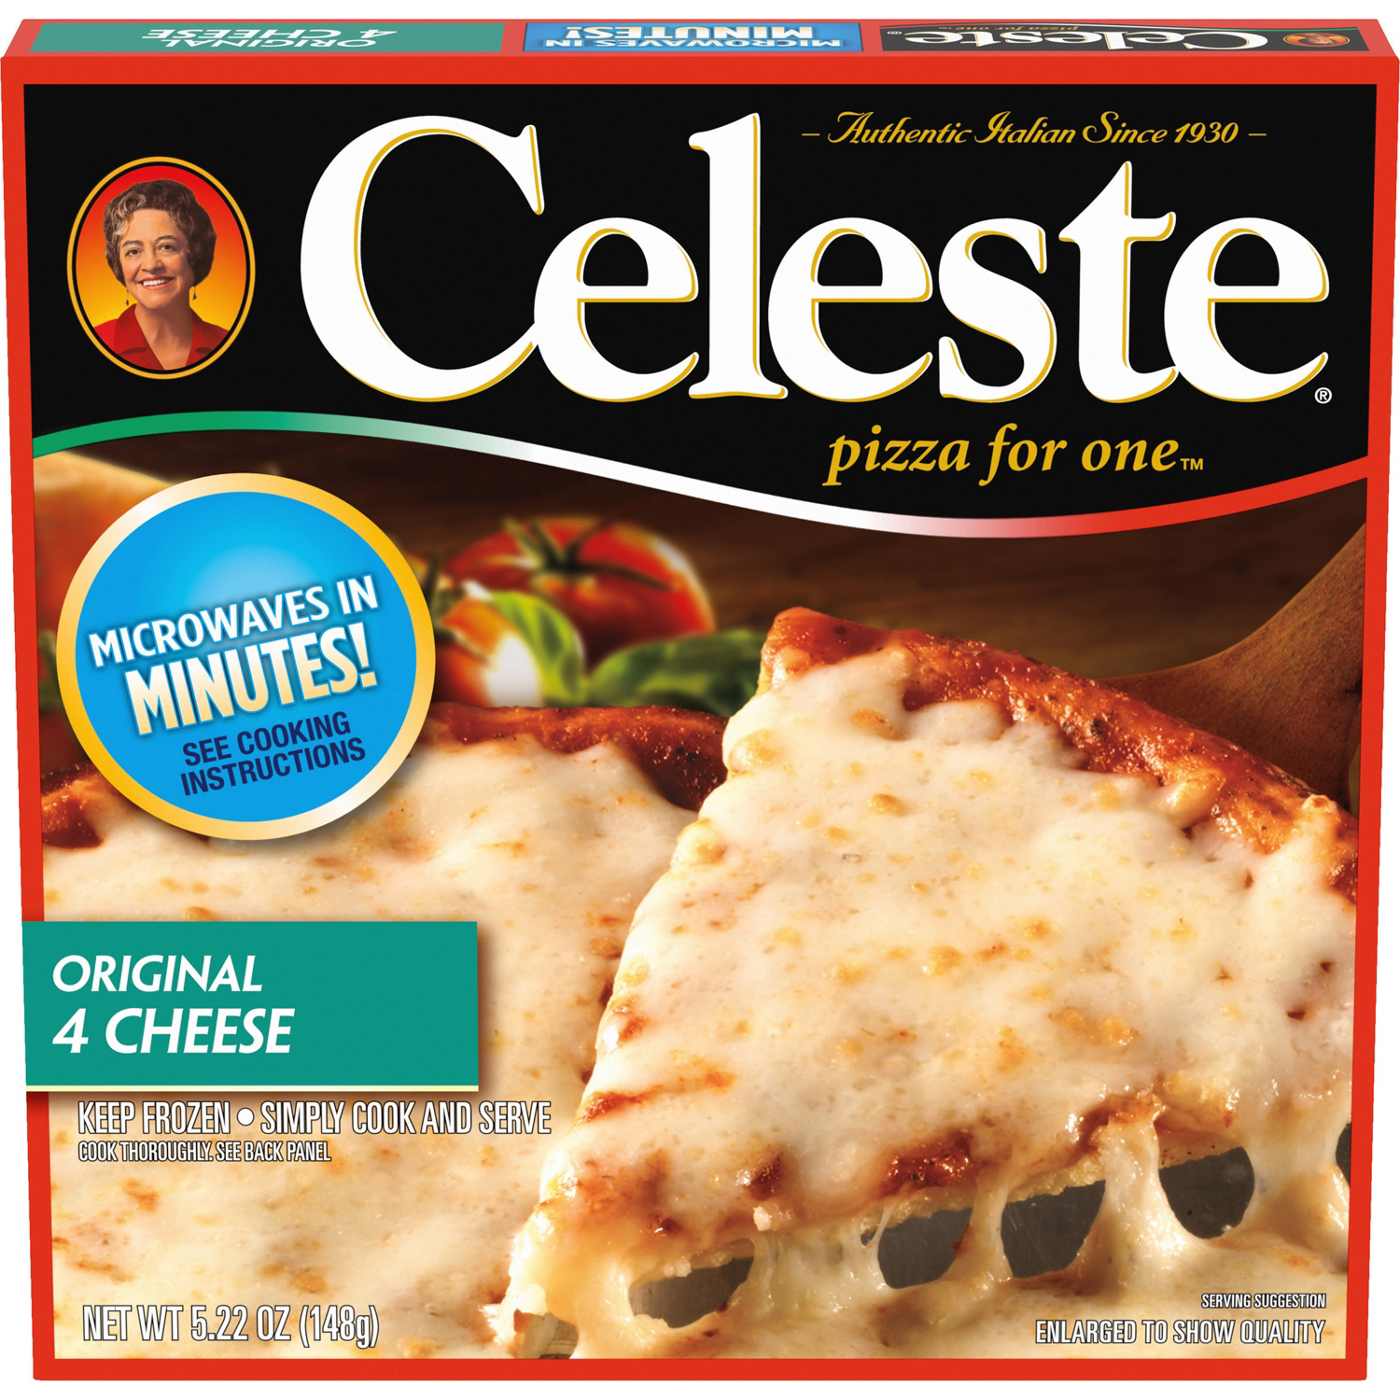 Celeste Personal Size Microwavable Frozen Pizza - 4 Cheese; image 1 of 3